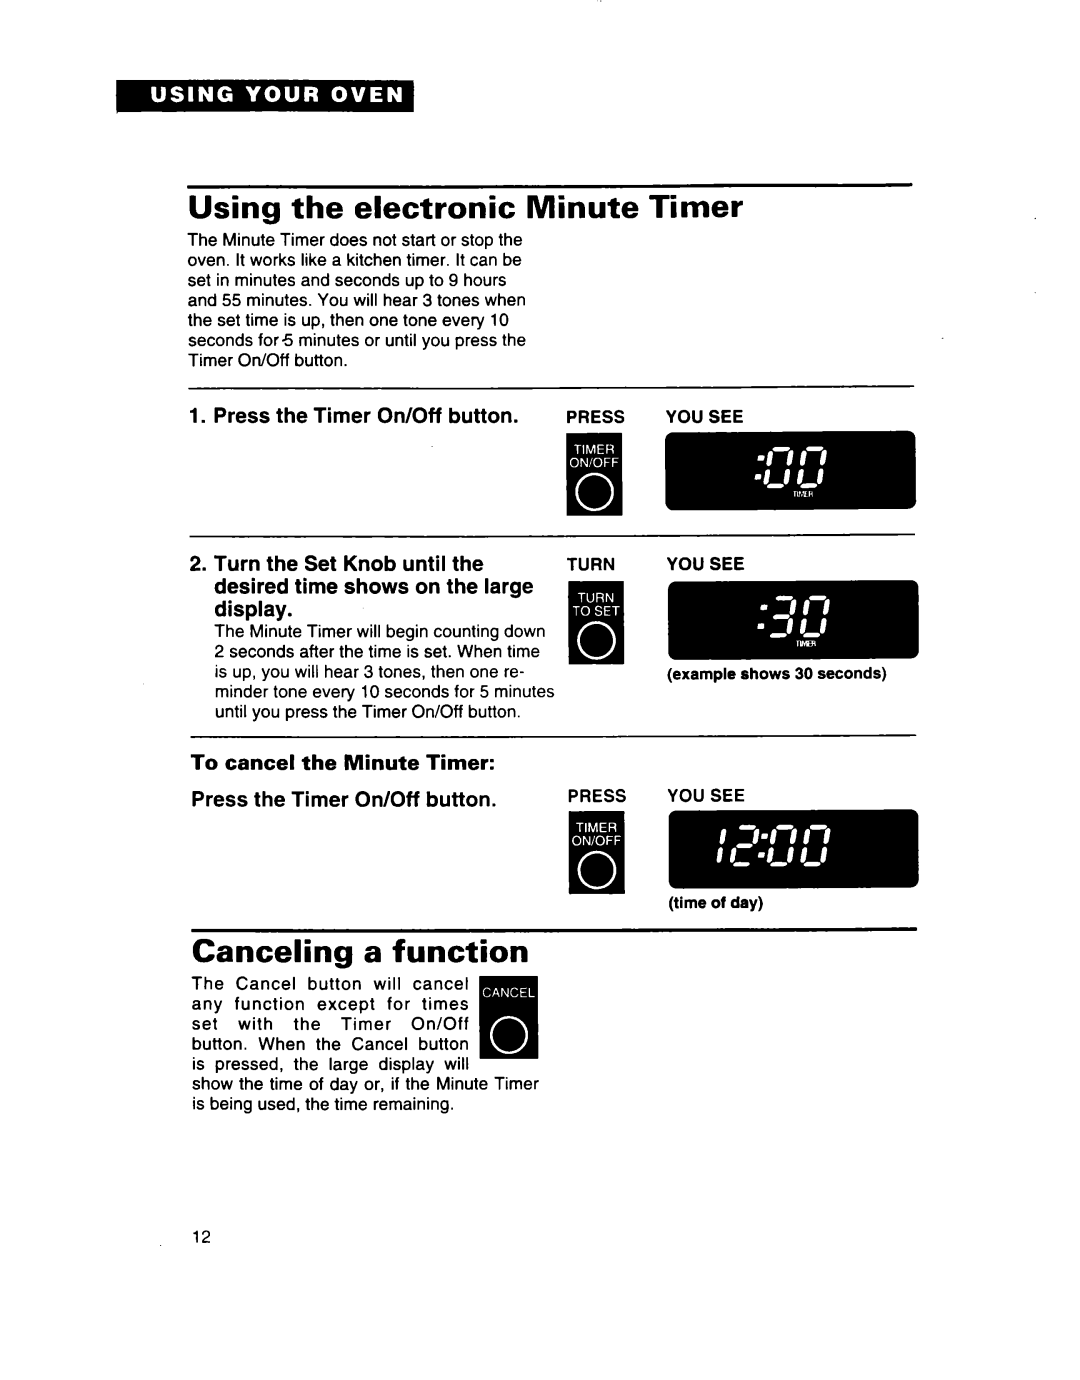 Whirlpool SB160PED warranty Using the electronic Minute Timer, Canceling a function, Press the Timer On/Off button, display 